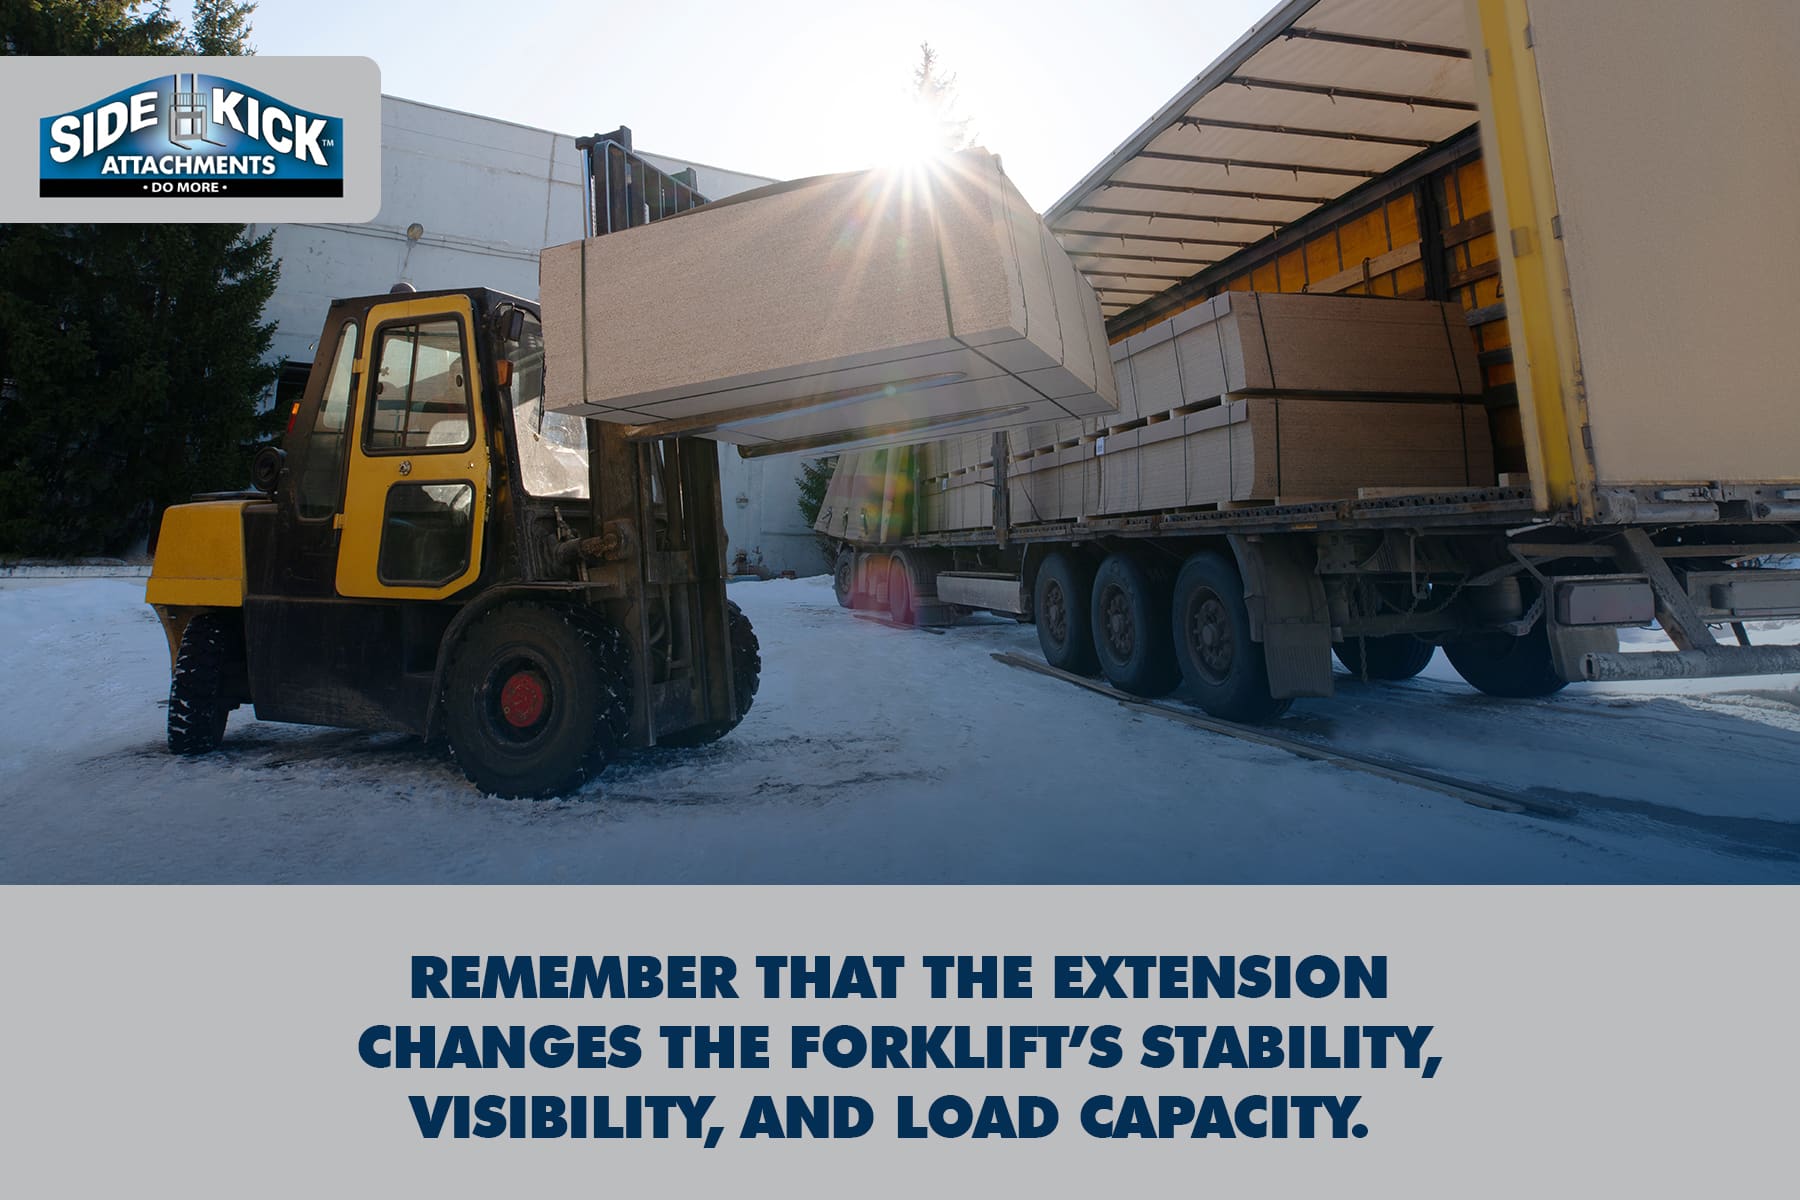 extension changes forklift's stability, visibility, and load capacity